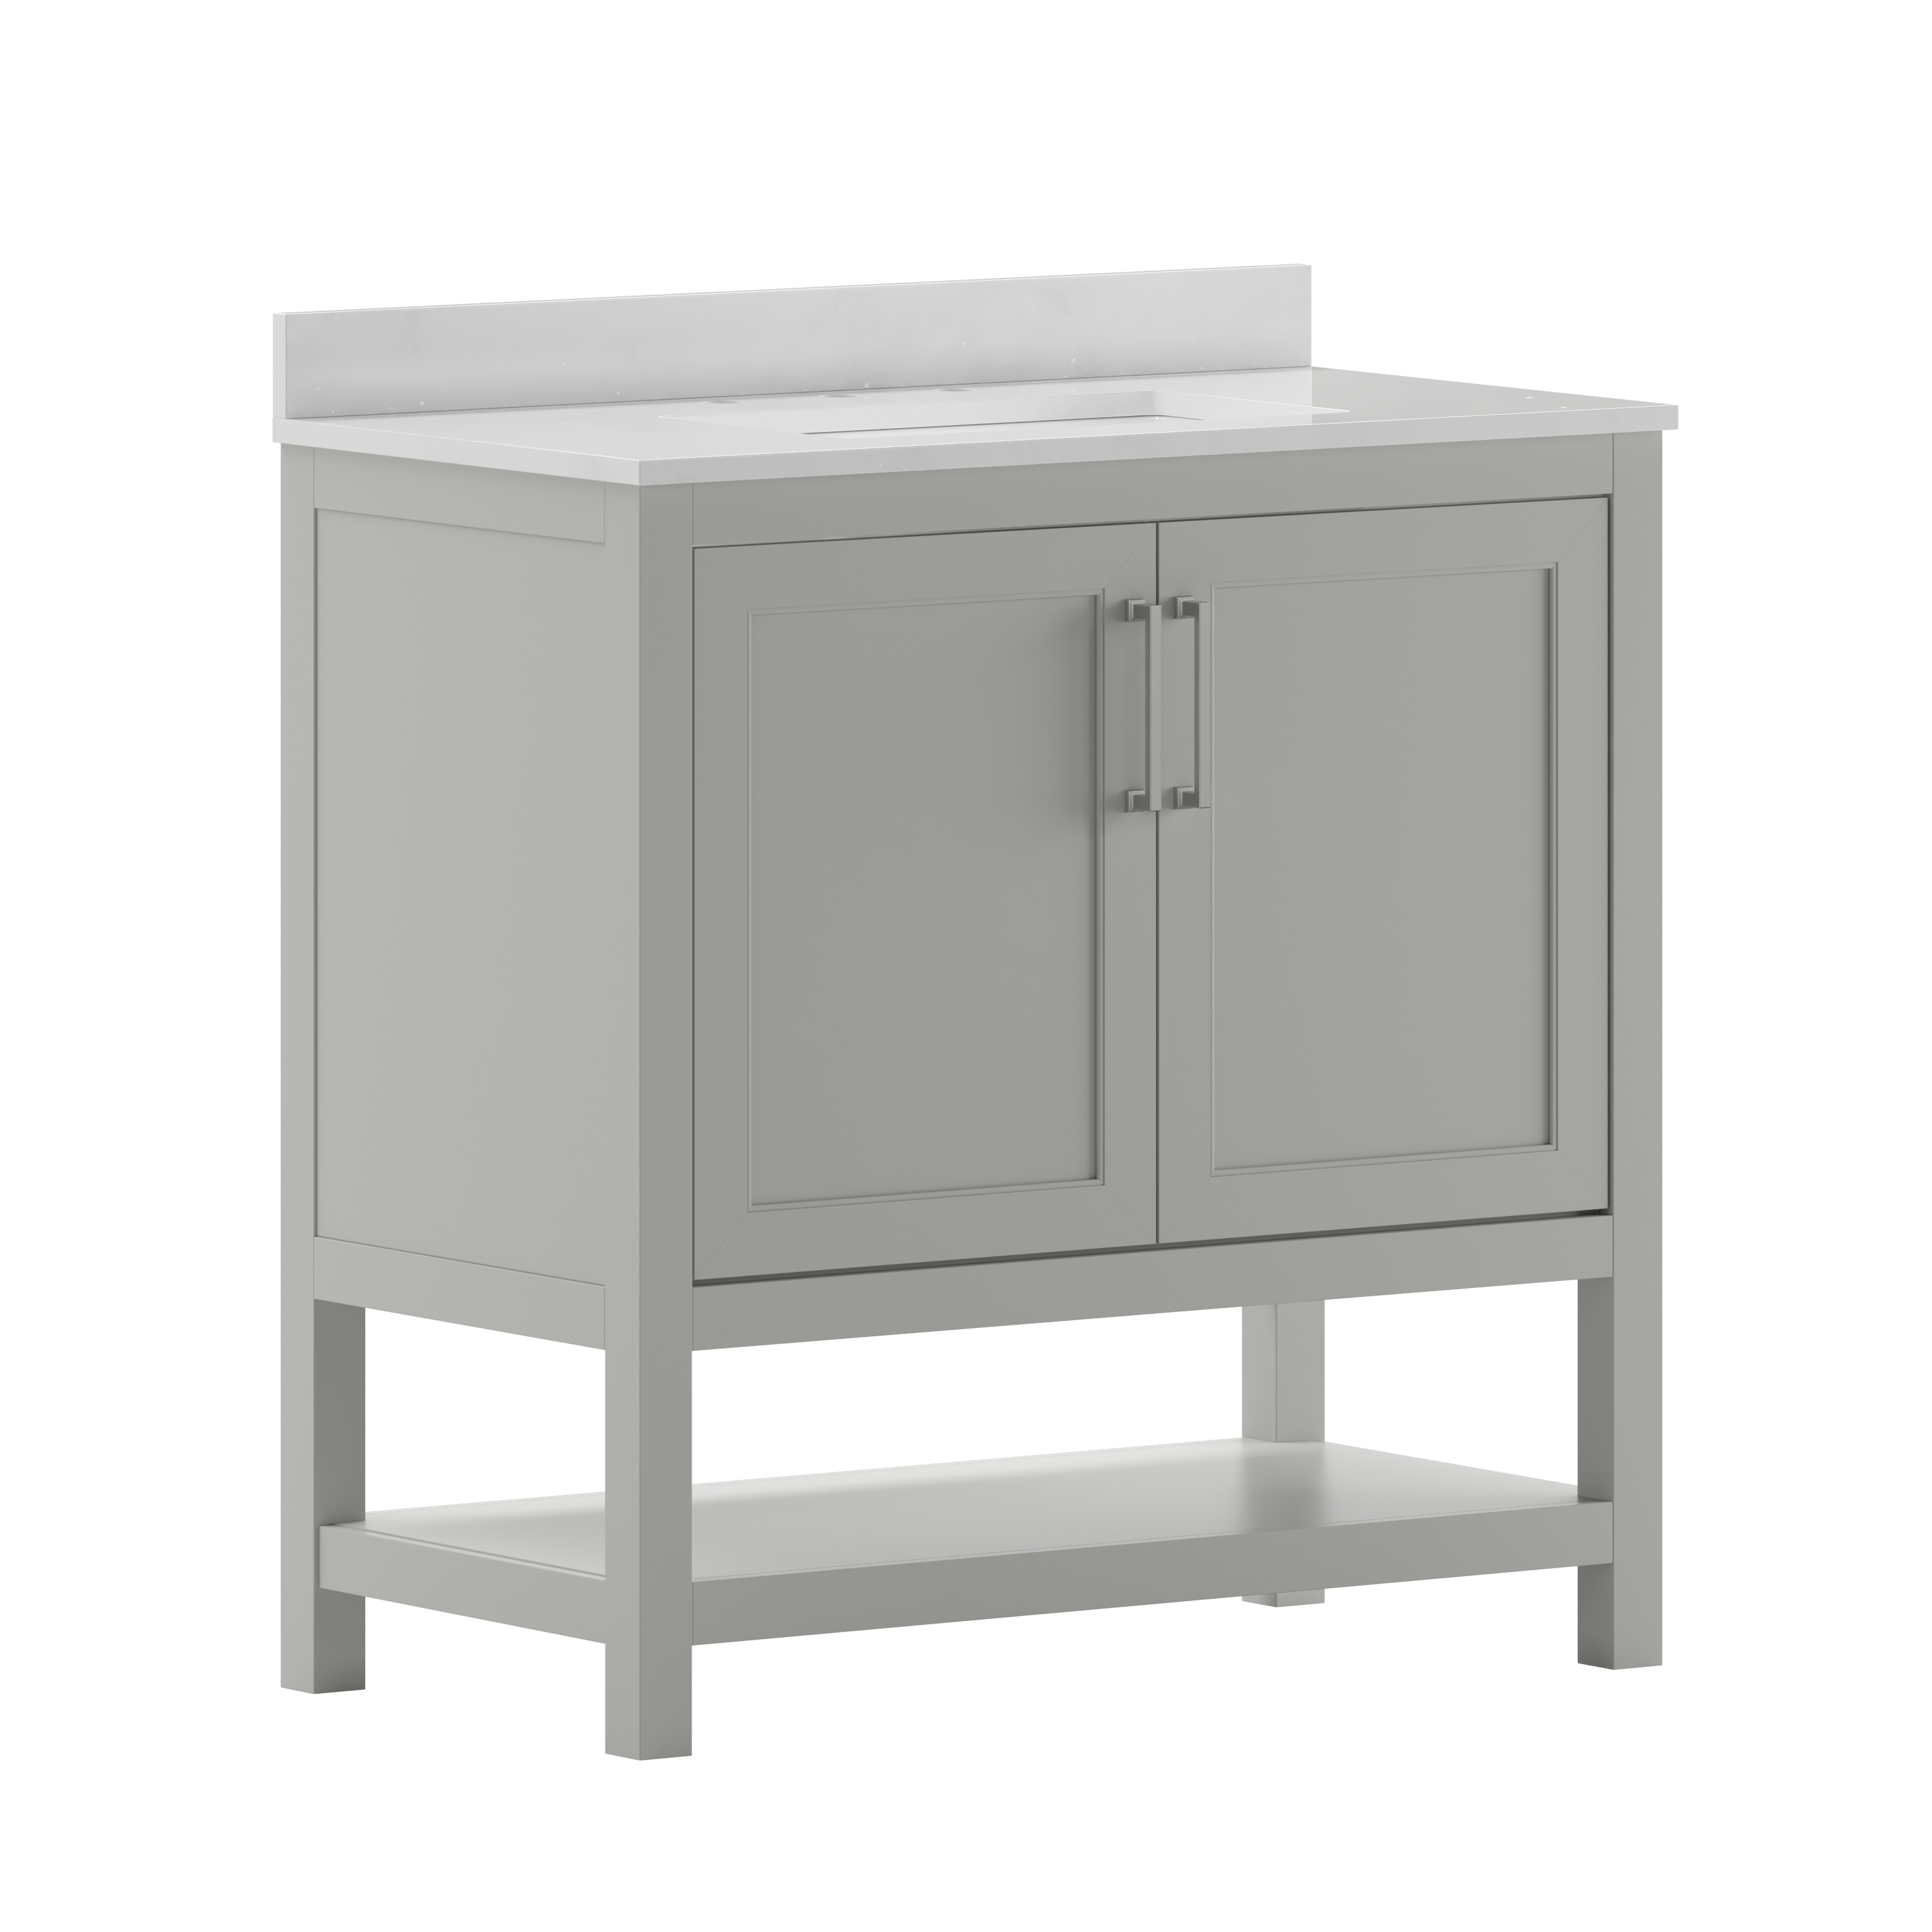 Flash Furniture FS-VEGA36-GY-GG 36" Bathroom Vanity with Sink Combo, Storage Cabinet and Open Shelf, Carrara Marble Finish Countertop, Gray/White